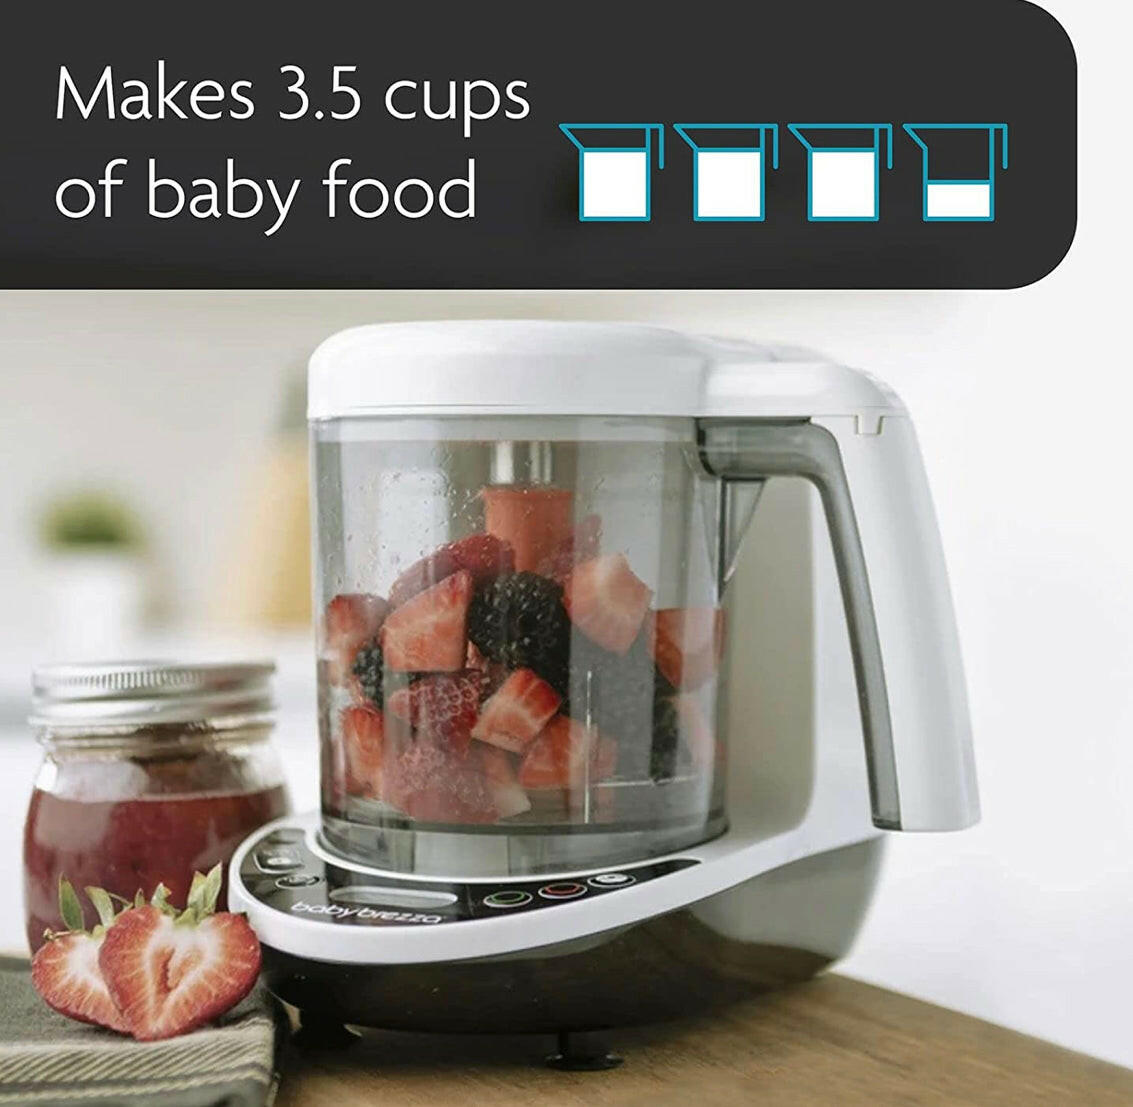 Baby Brezza One Step Food Maker Deluxe.